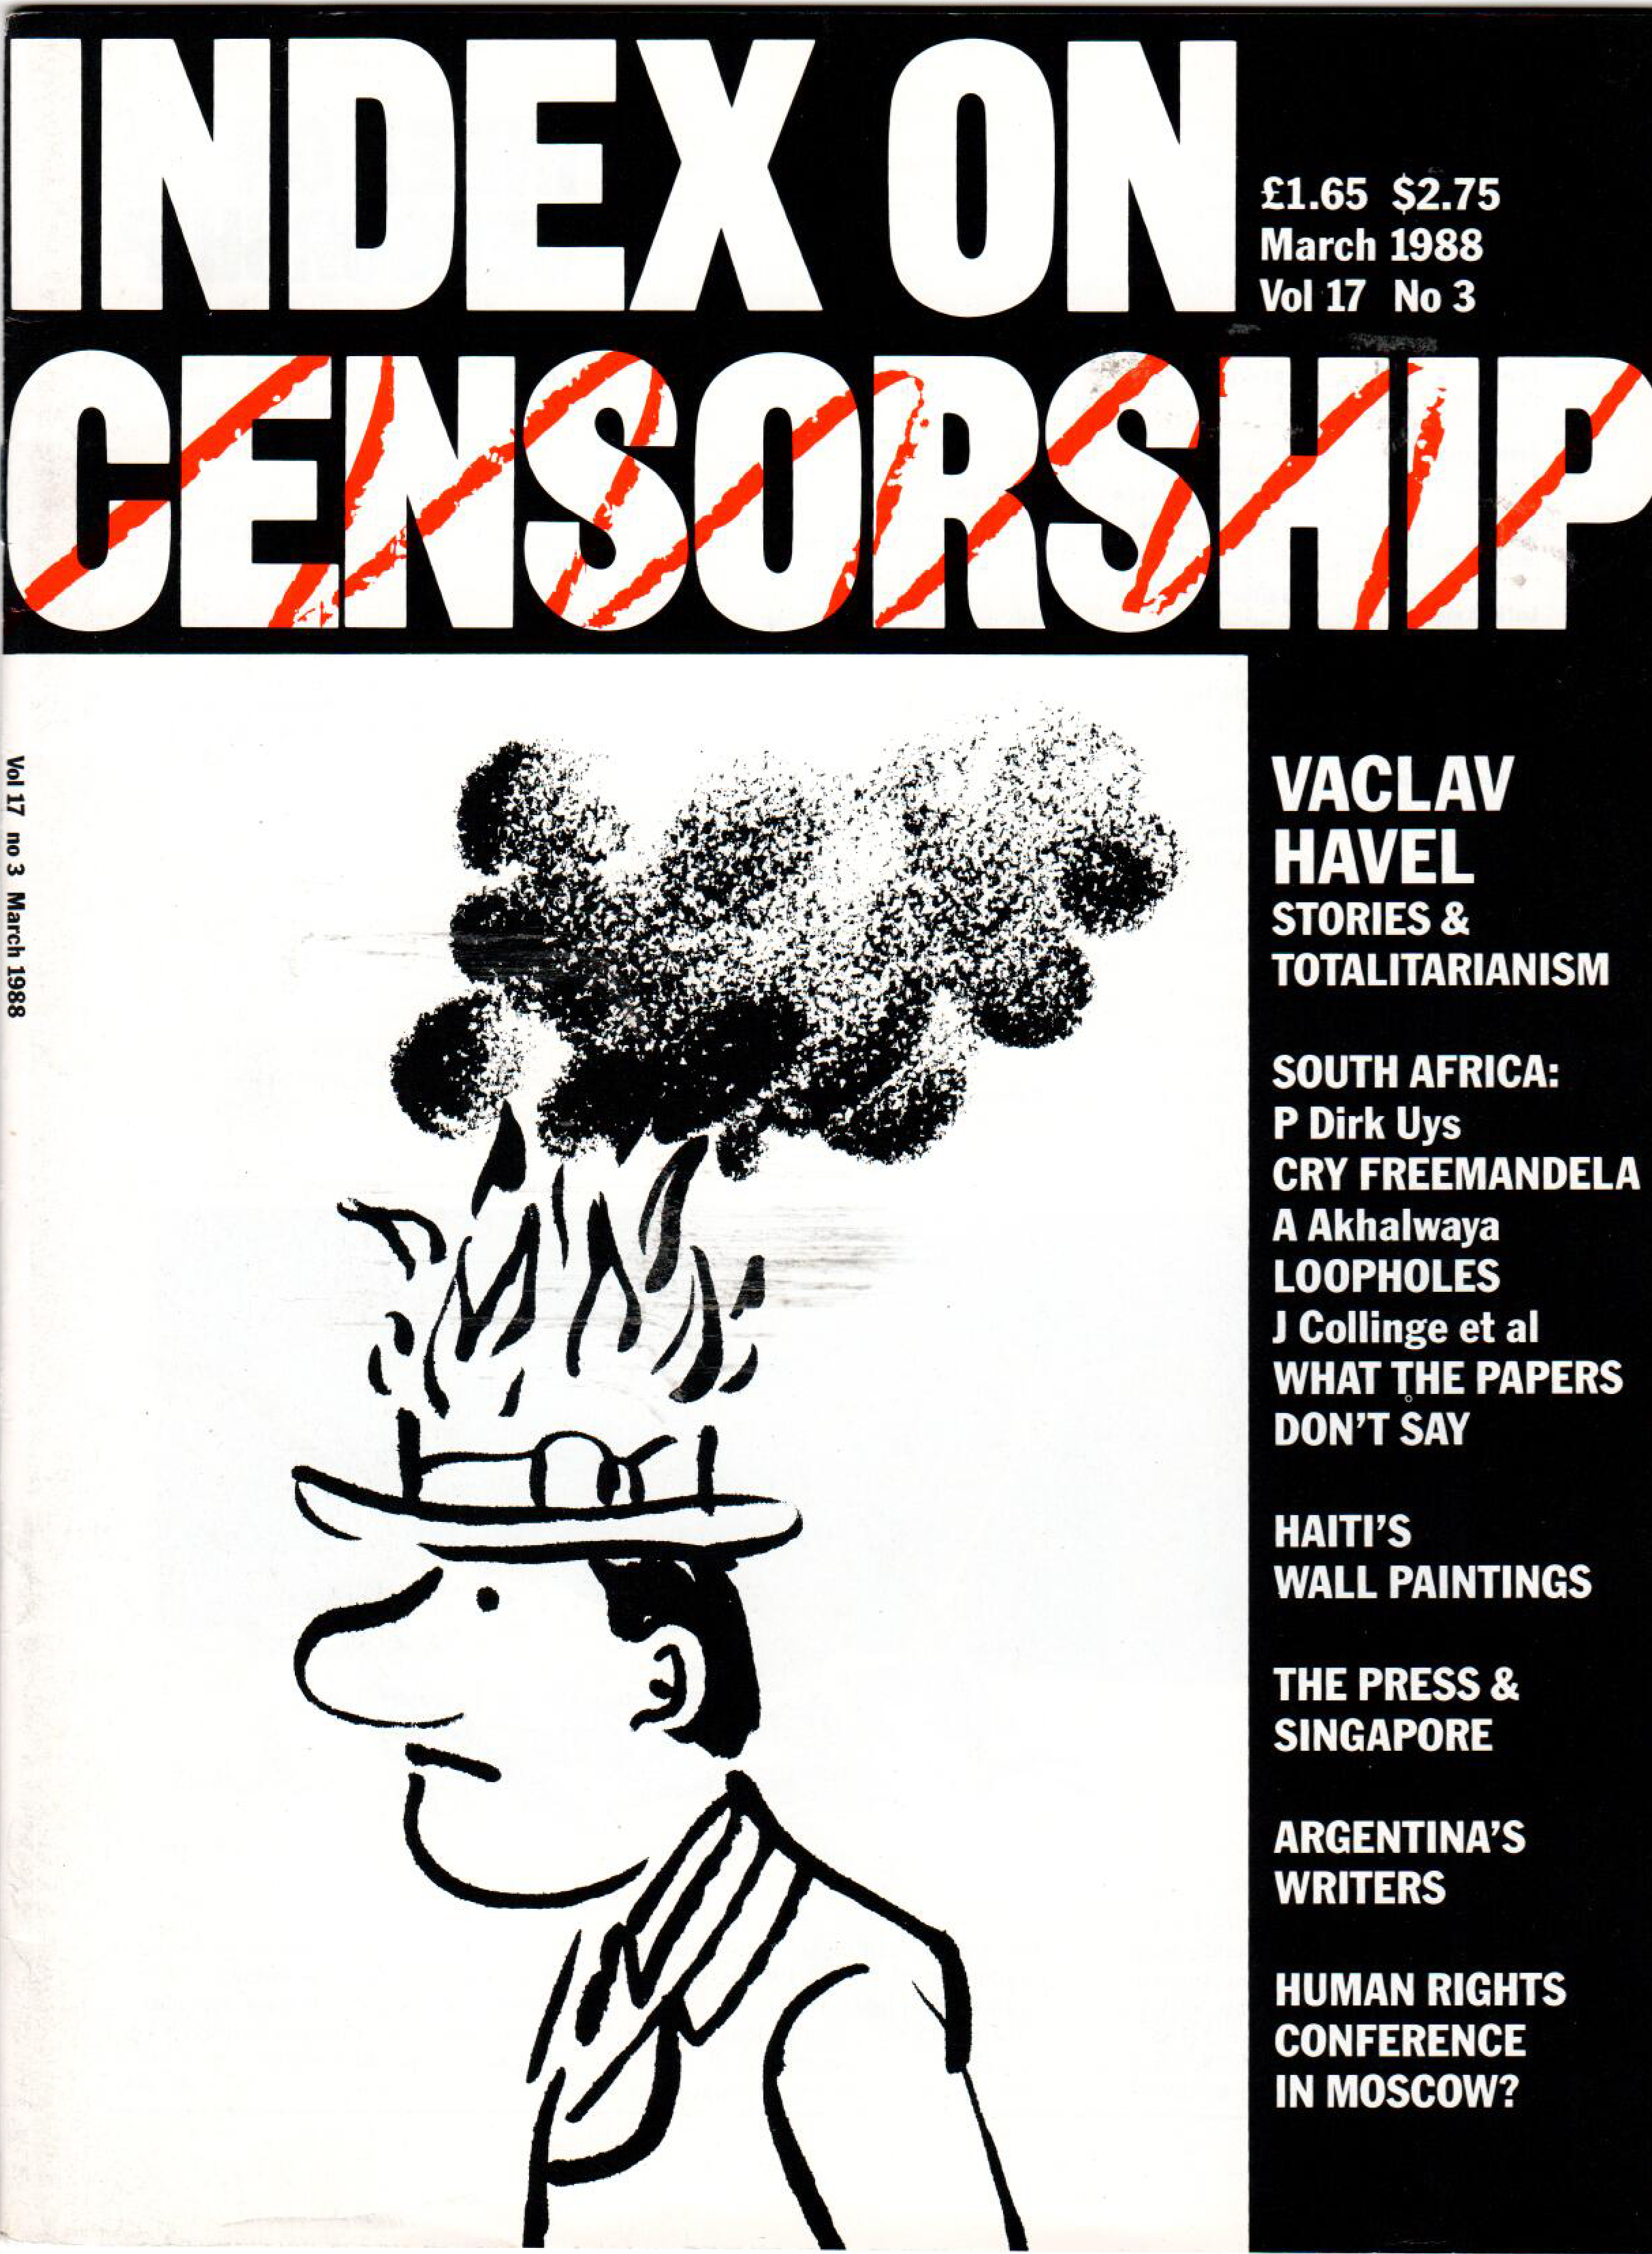 Vaclav Havel: Stories & totalitarianism, the March 1988 issue of Index on Censorship magazine.